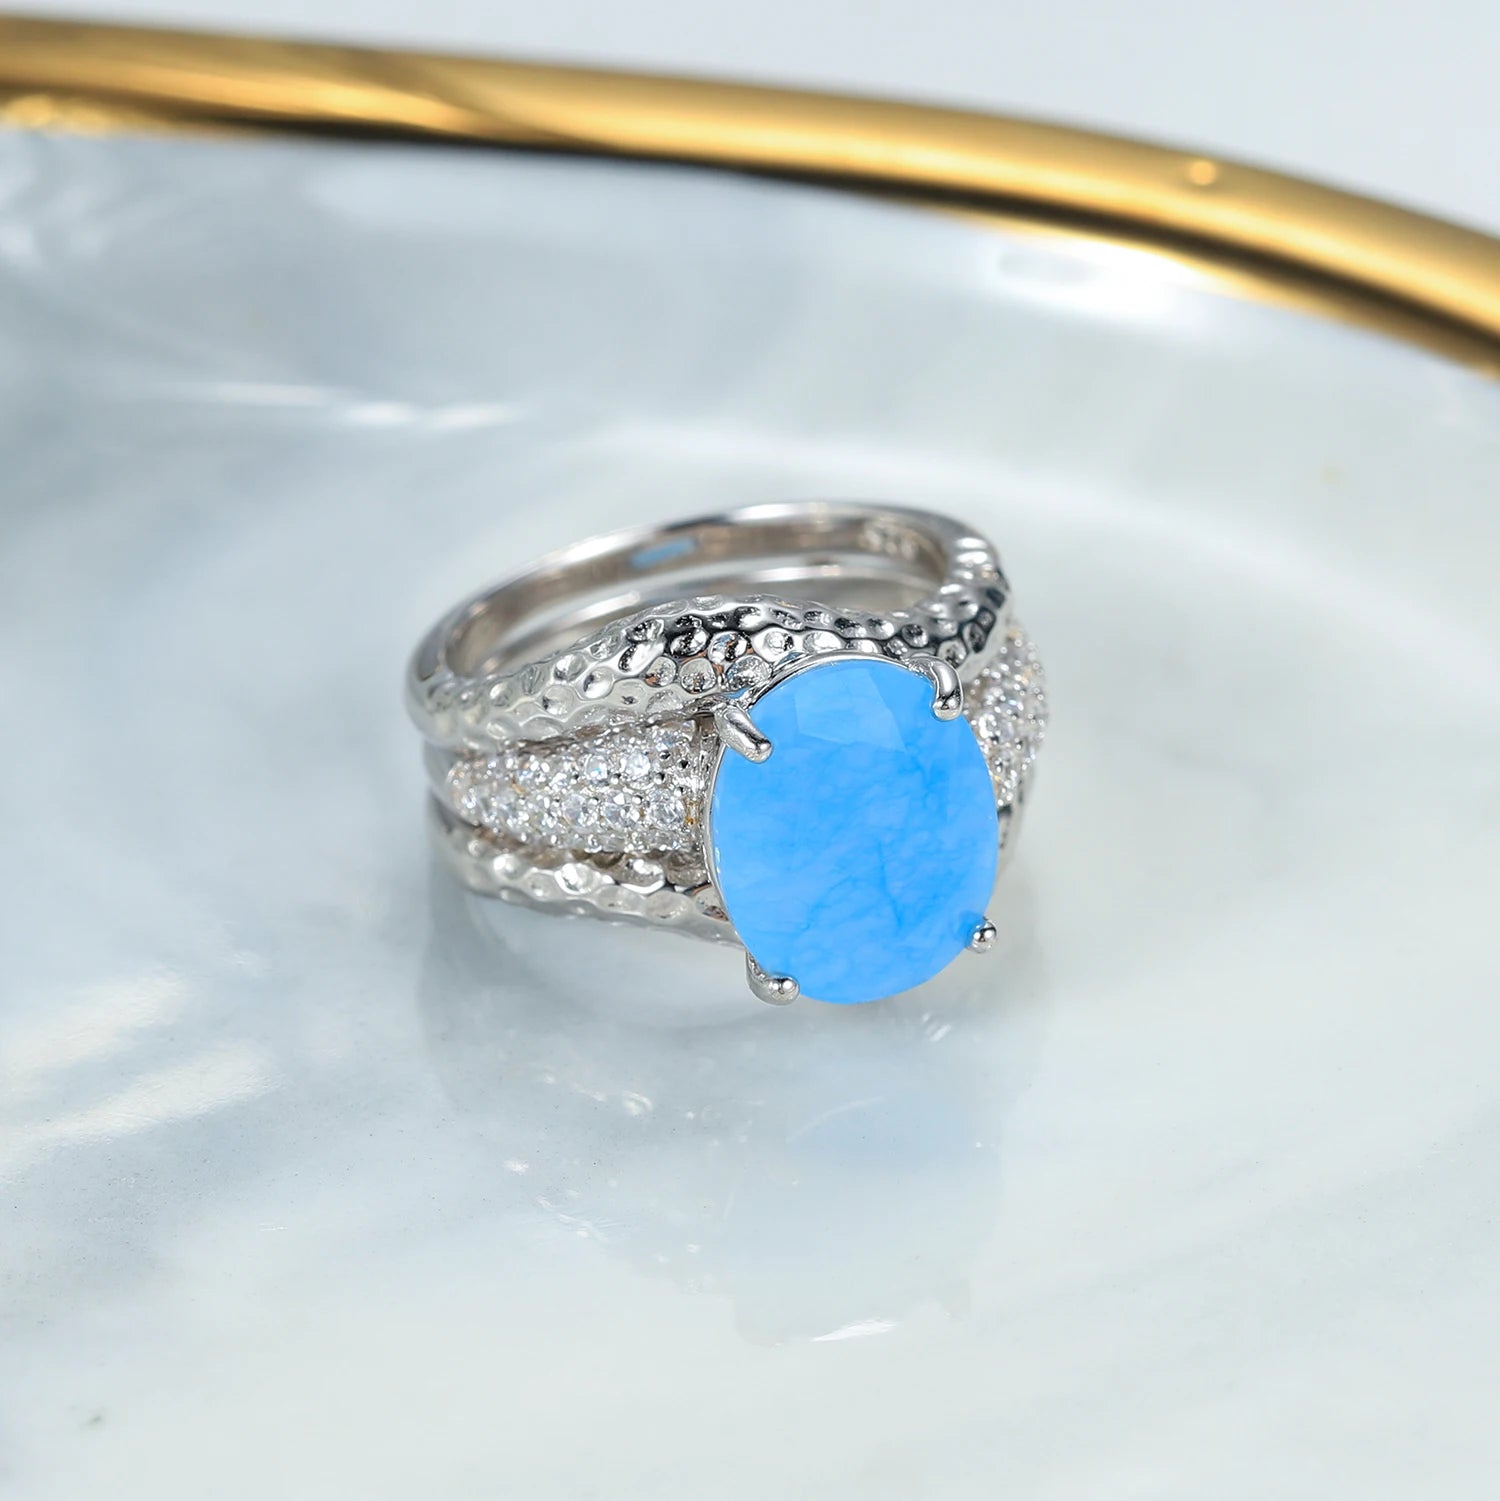 GEM'S BALLE Aqua-blue Calcedony Gemstone Cocktail Ring 925 Sterling Silver Handmade Jacket Rings For Women Fine Jewelry